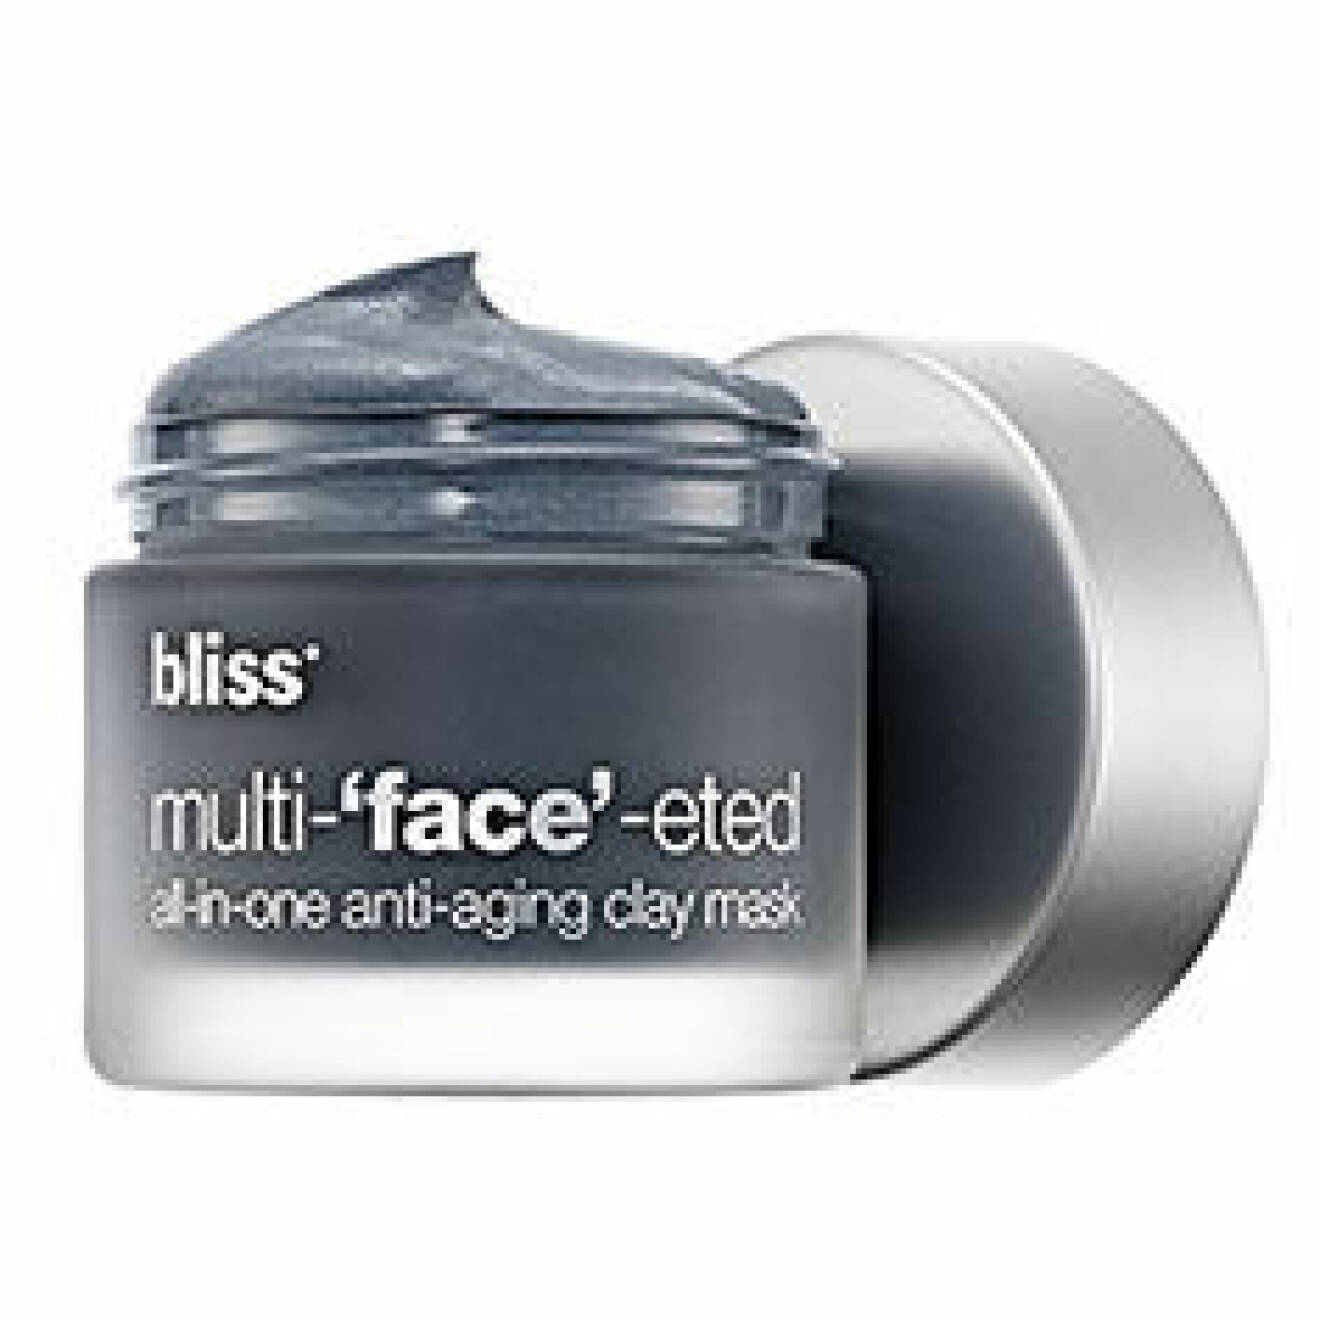 Multi-’face’-eted all-in-one anti-aging clay mask 